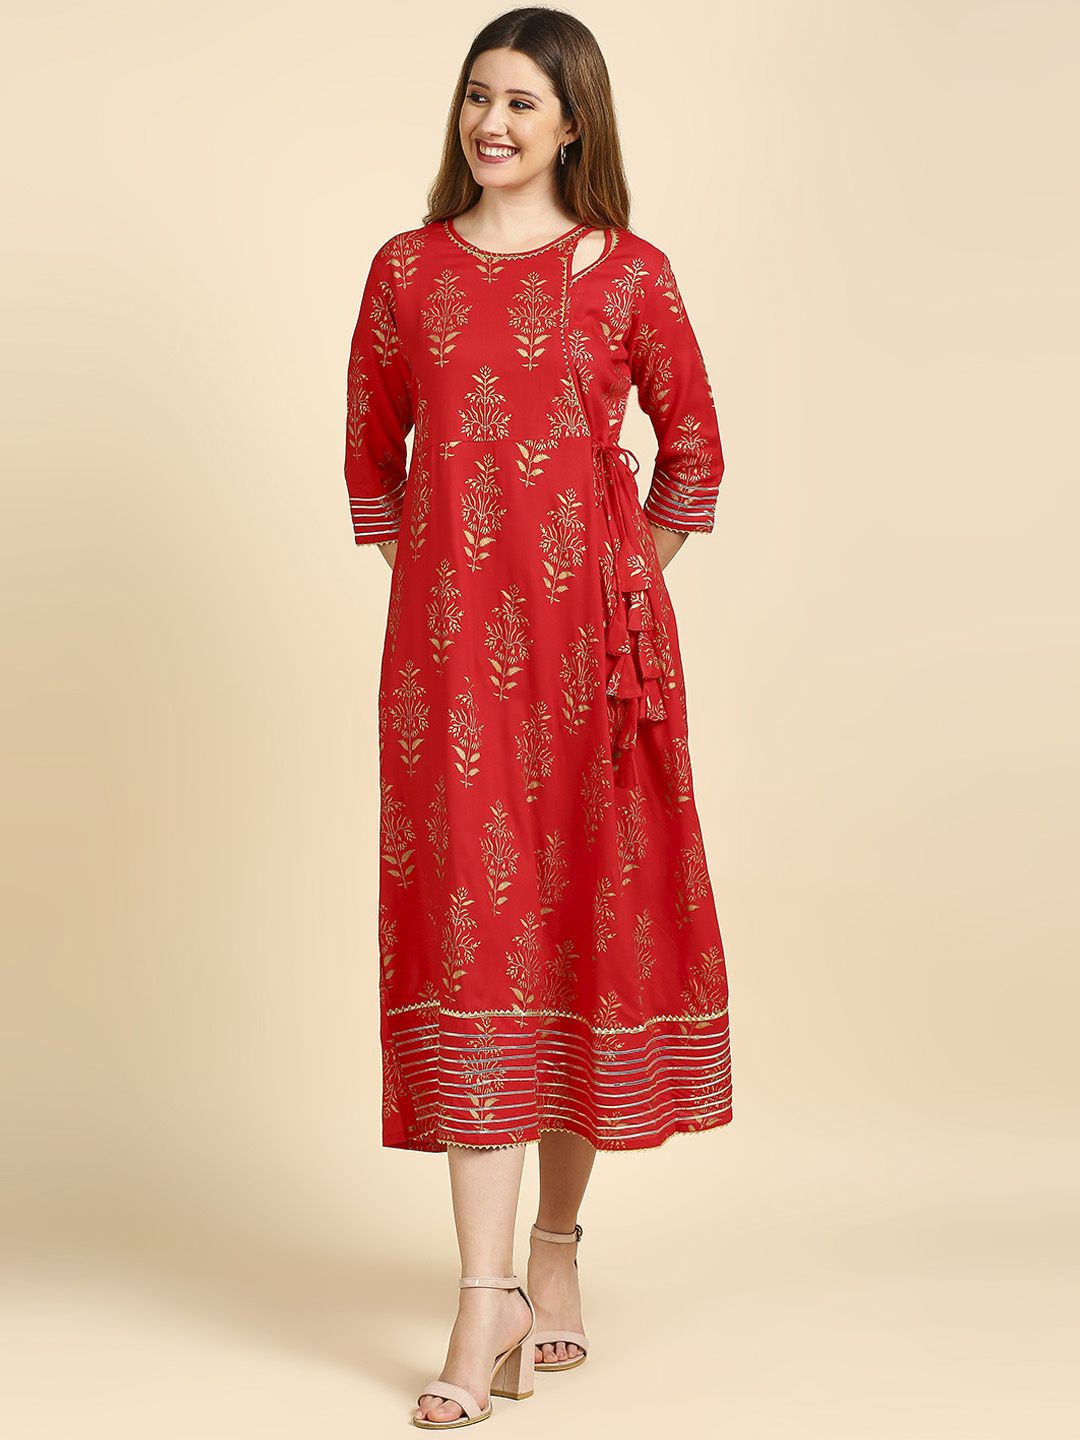 Anubhutee Red Ethnic Motifs Ethnic A-Line Maxi Dress Price in India